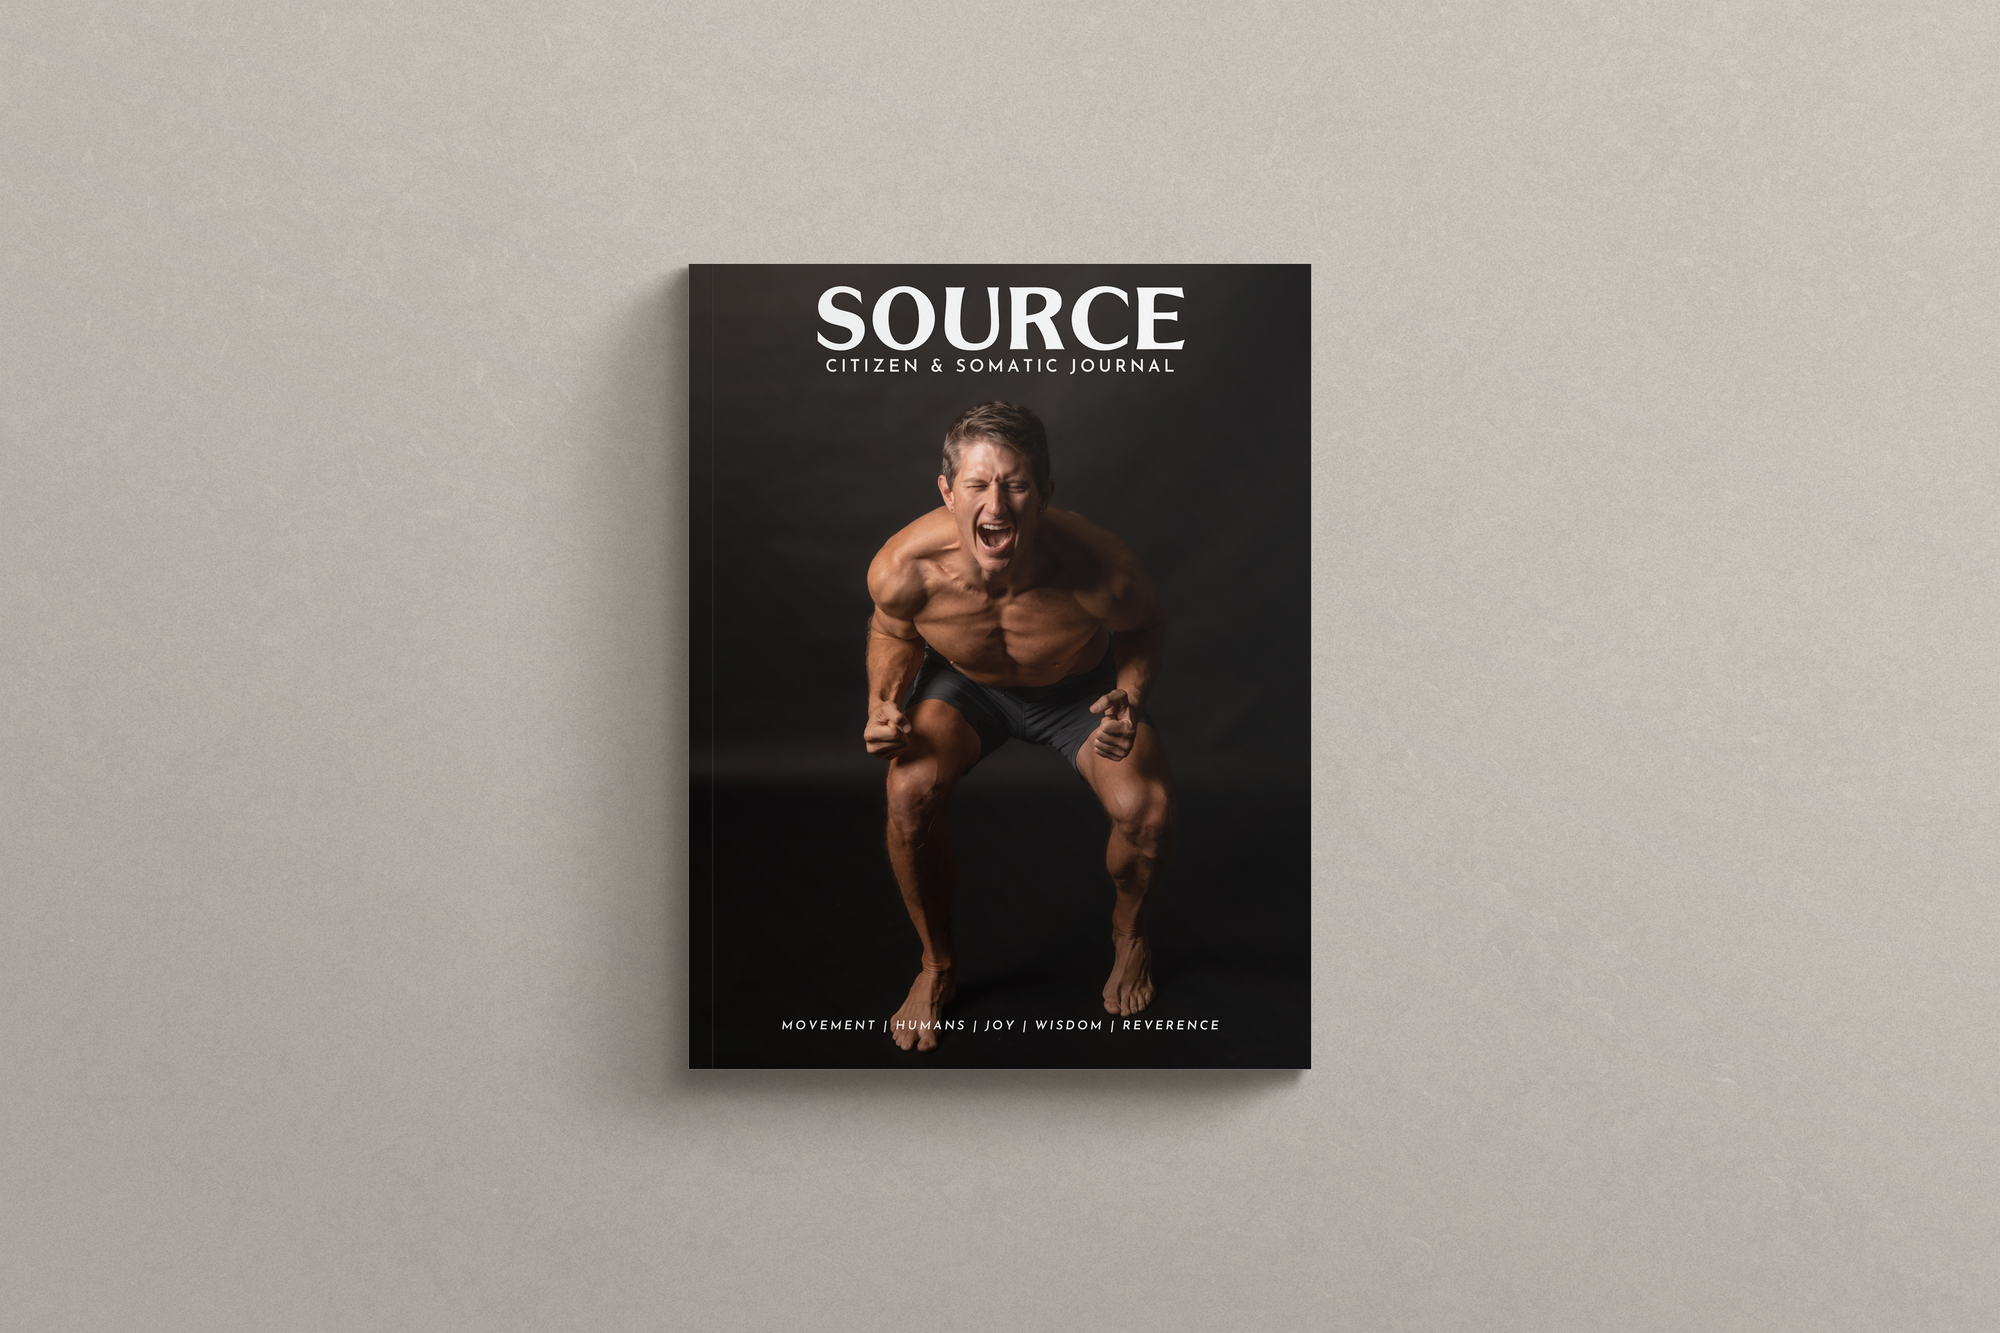 SOURCE JOURNAL ANNUAL SUBSCRIPTION